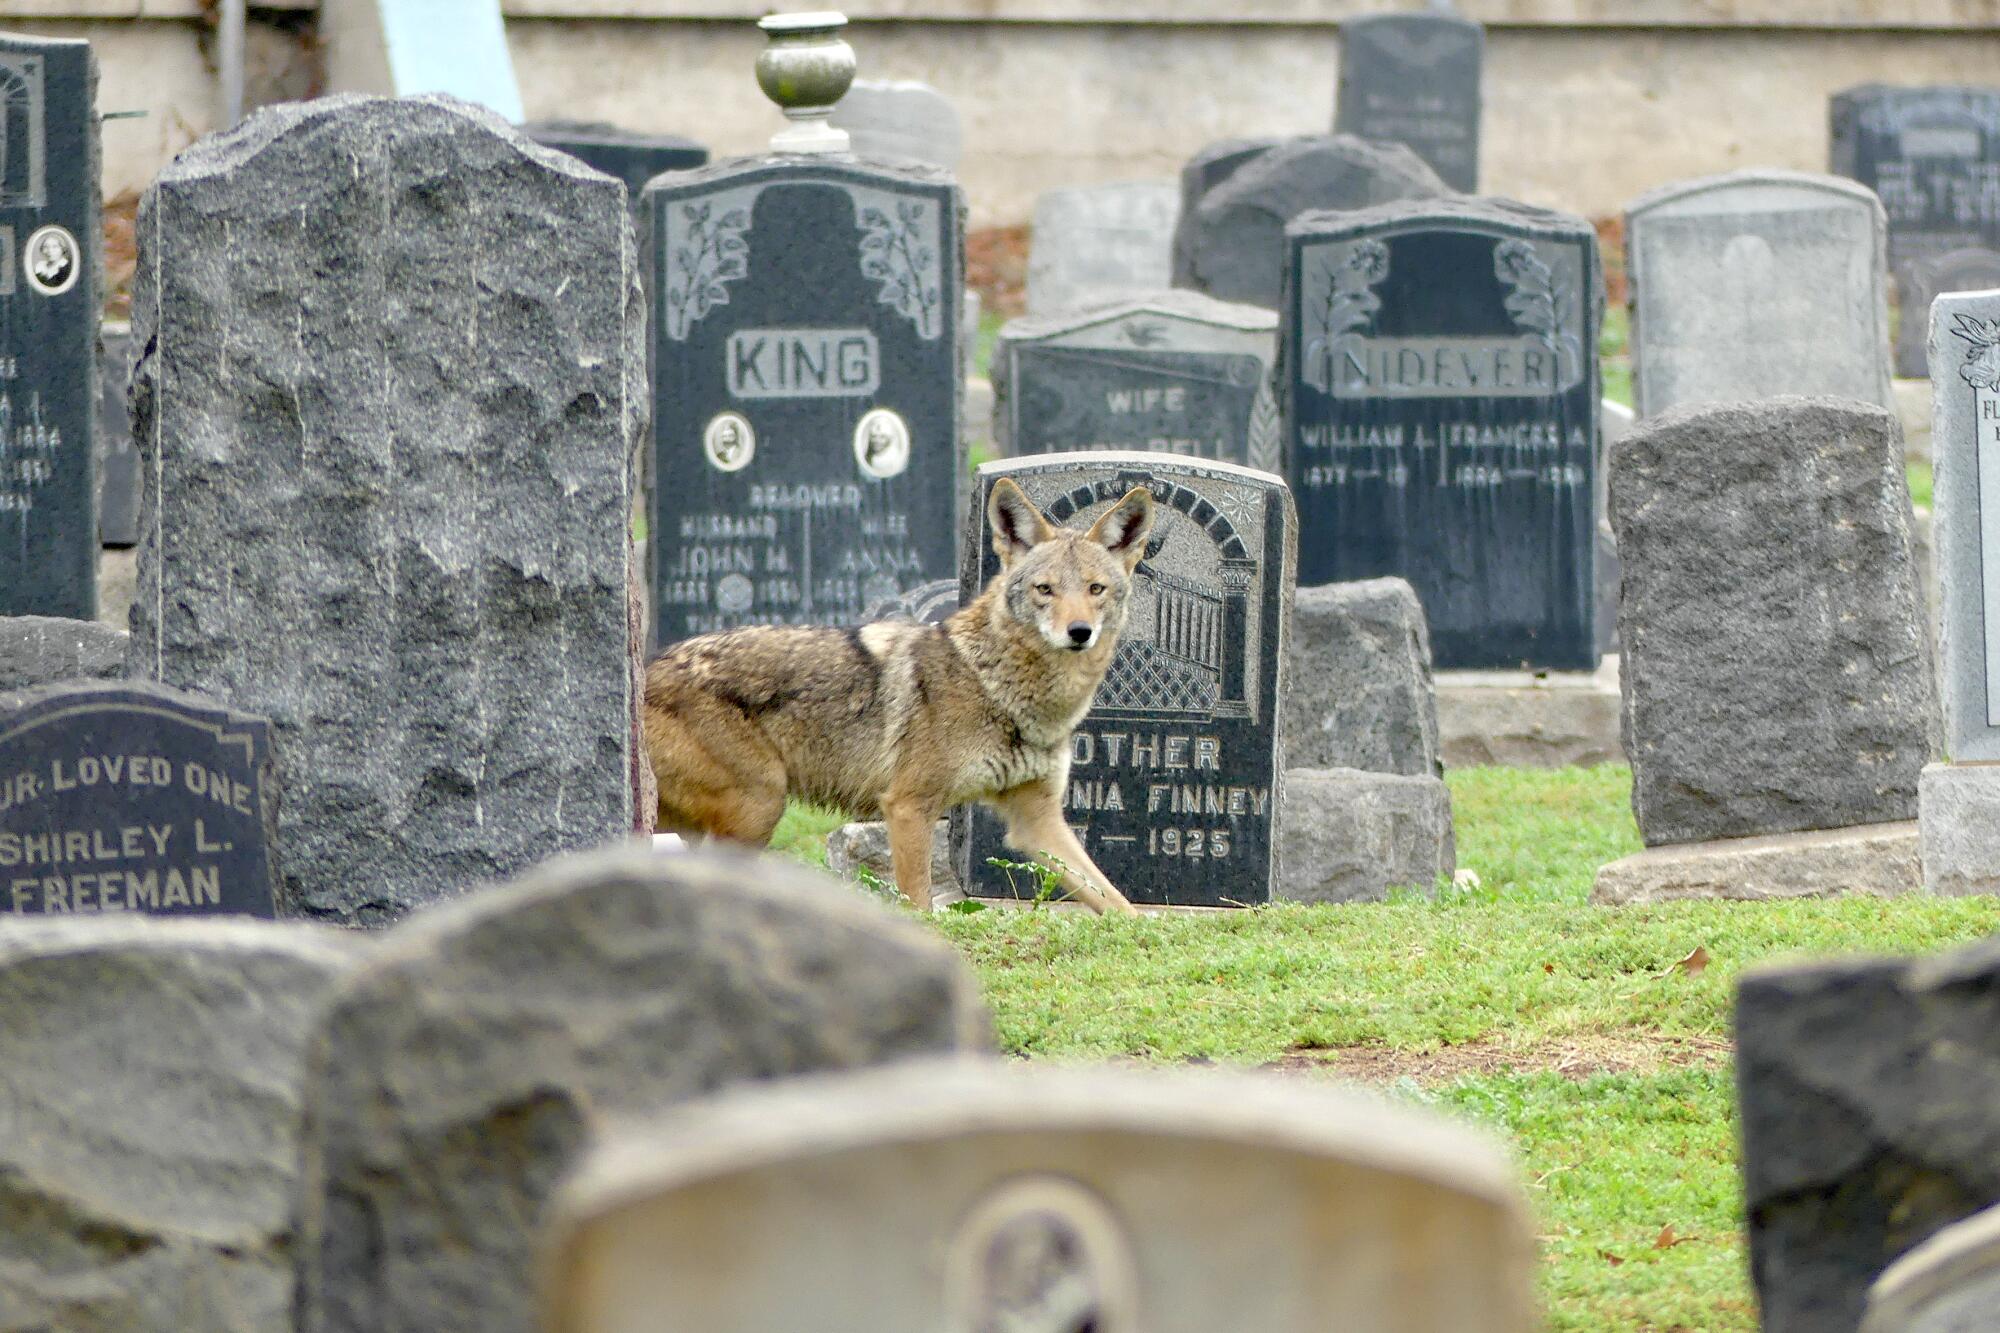 A coyote stands among gravestones